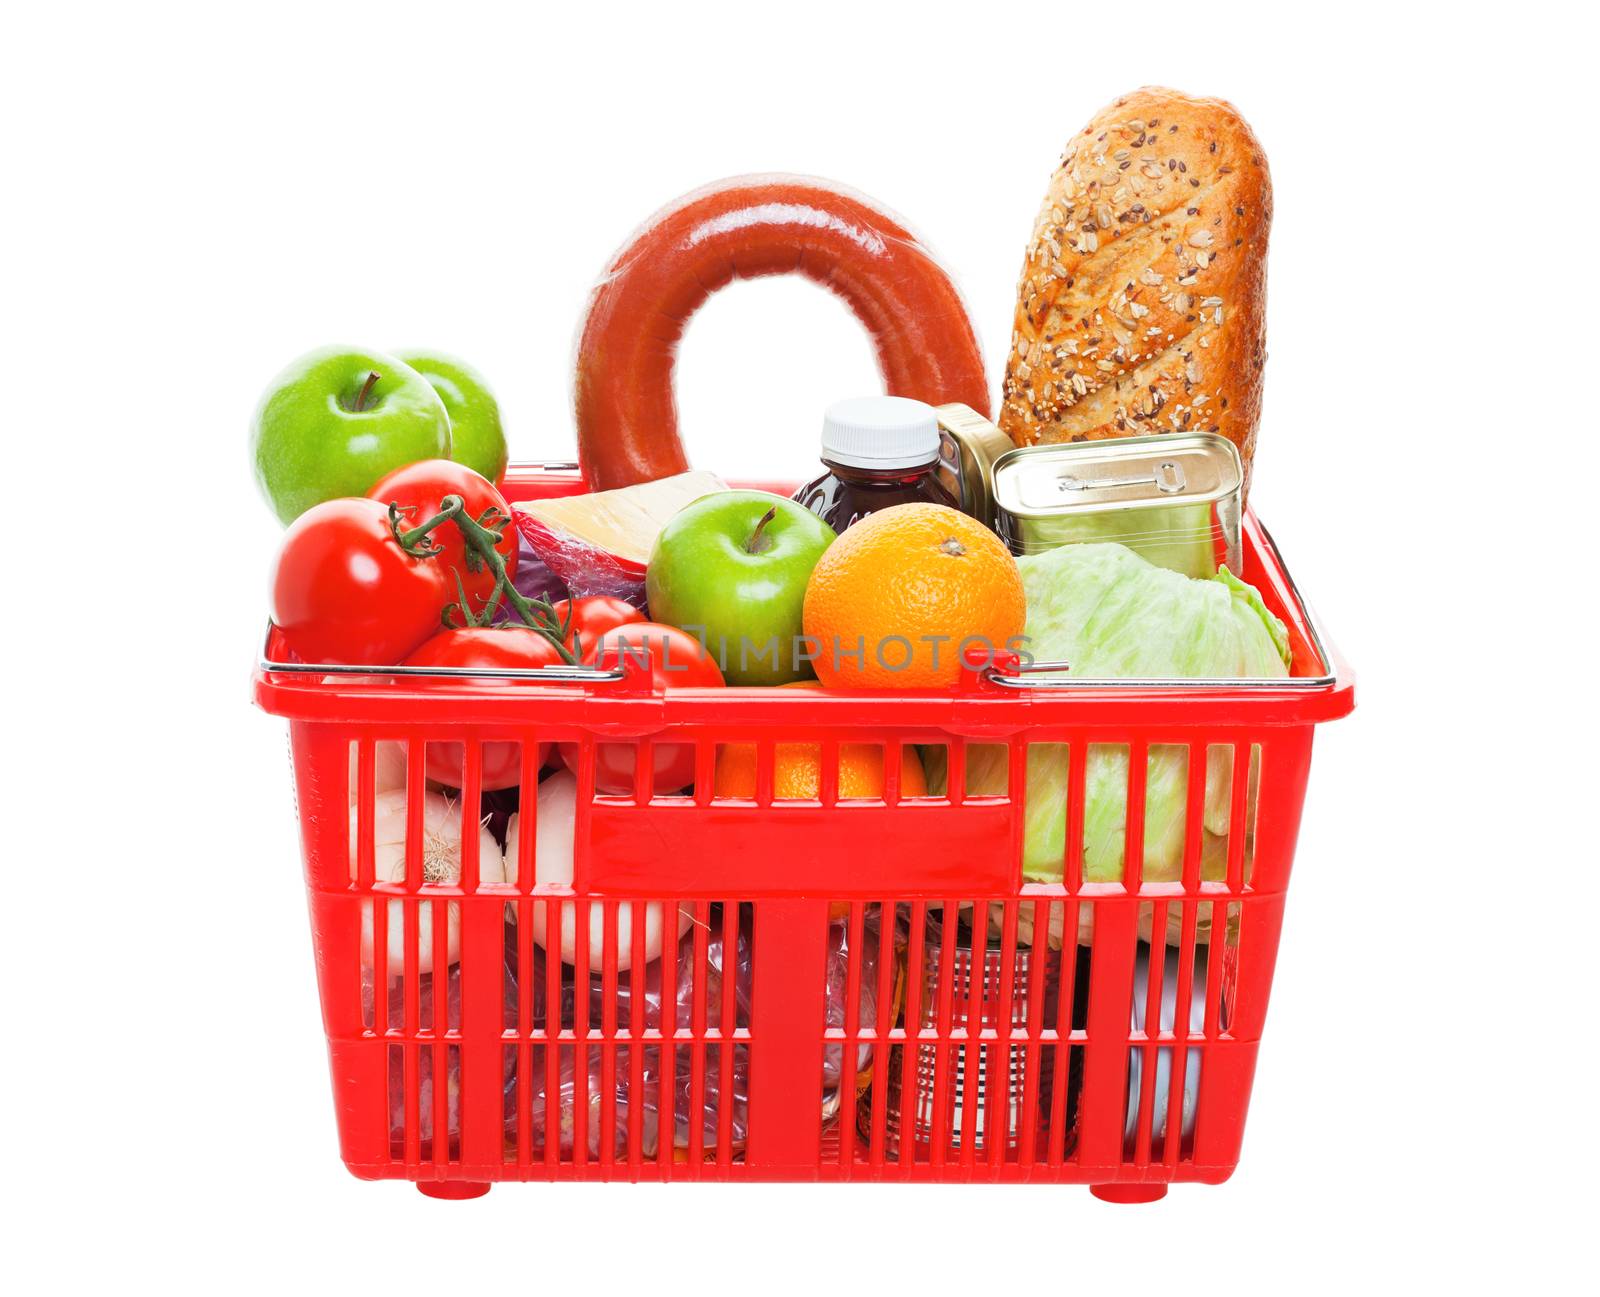 A grocery basket filled with fresh fruits, vegetables, sausage, bread, and canned goods.  Shot on white background.